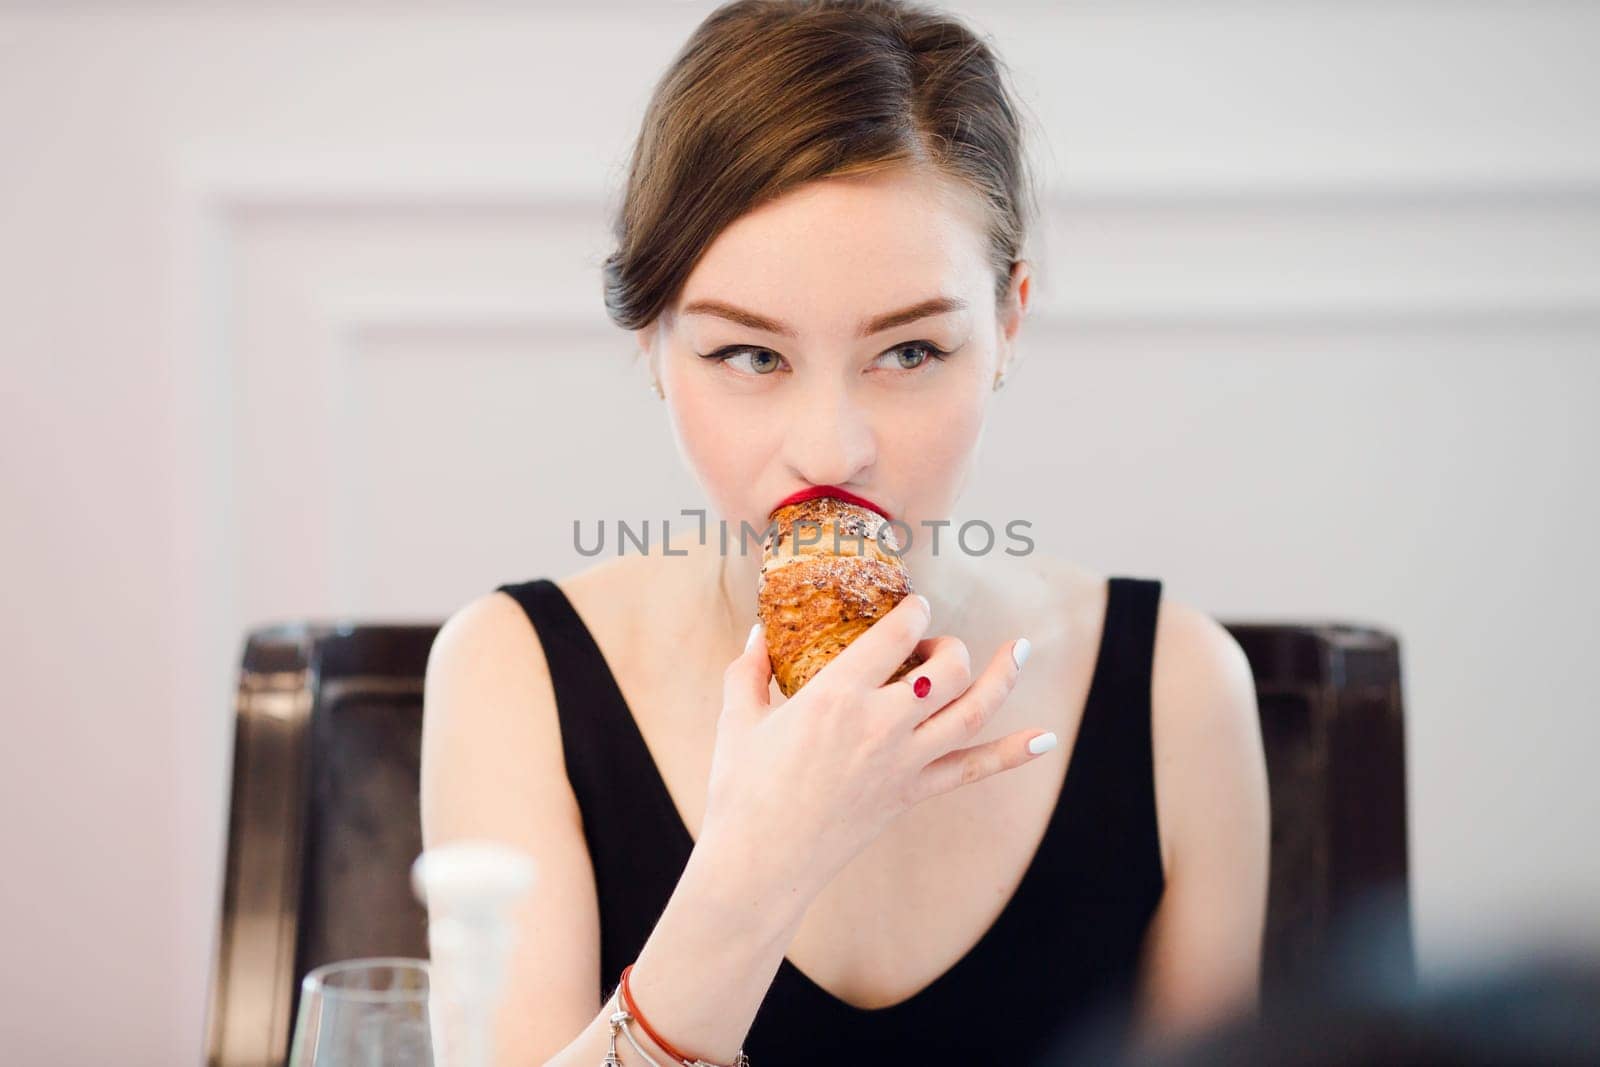 Made-up woman biting in a croissant in a cafe interior